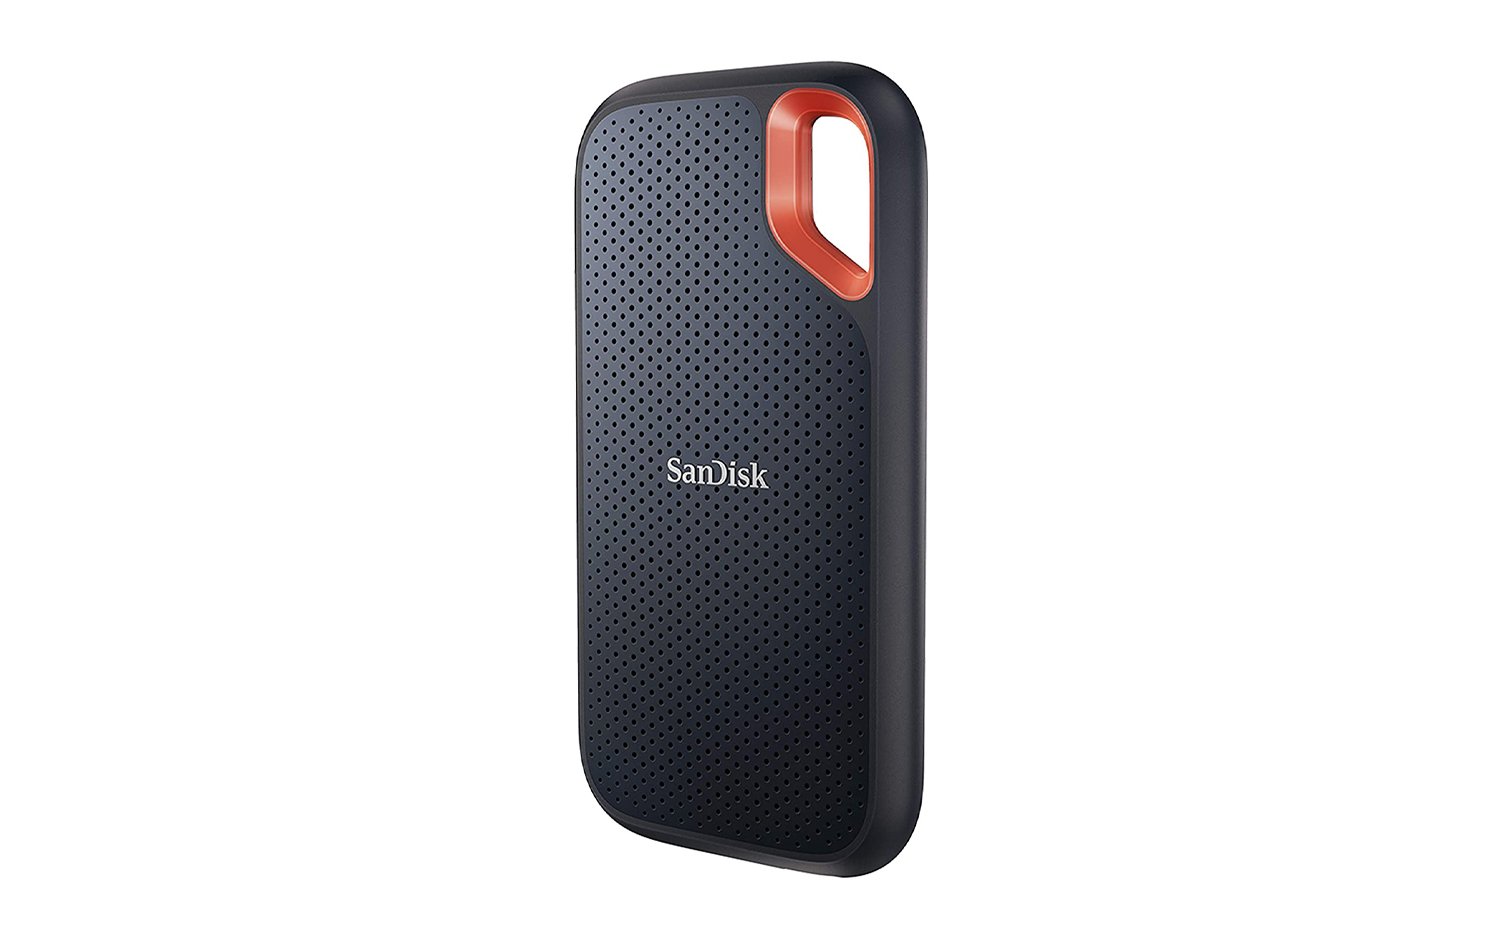 best MacBook back to school accessories: SanDisk 500GB Extreme Portable SSD on white background